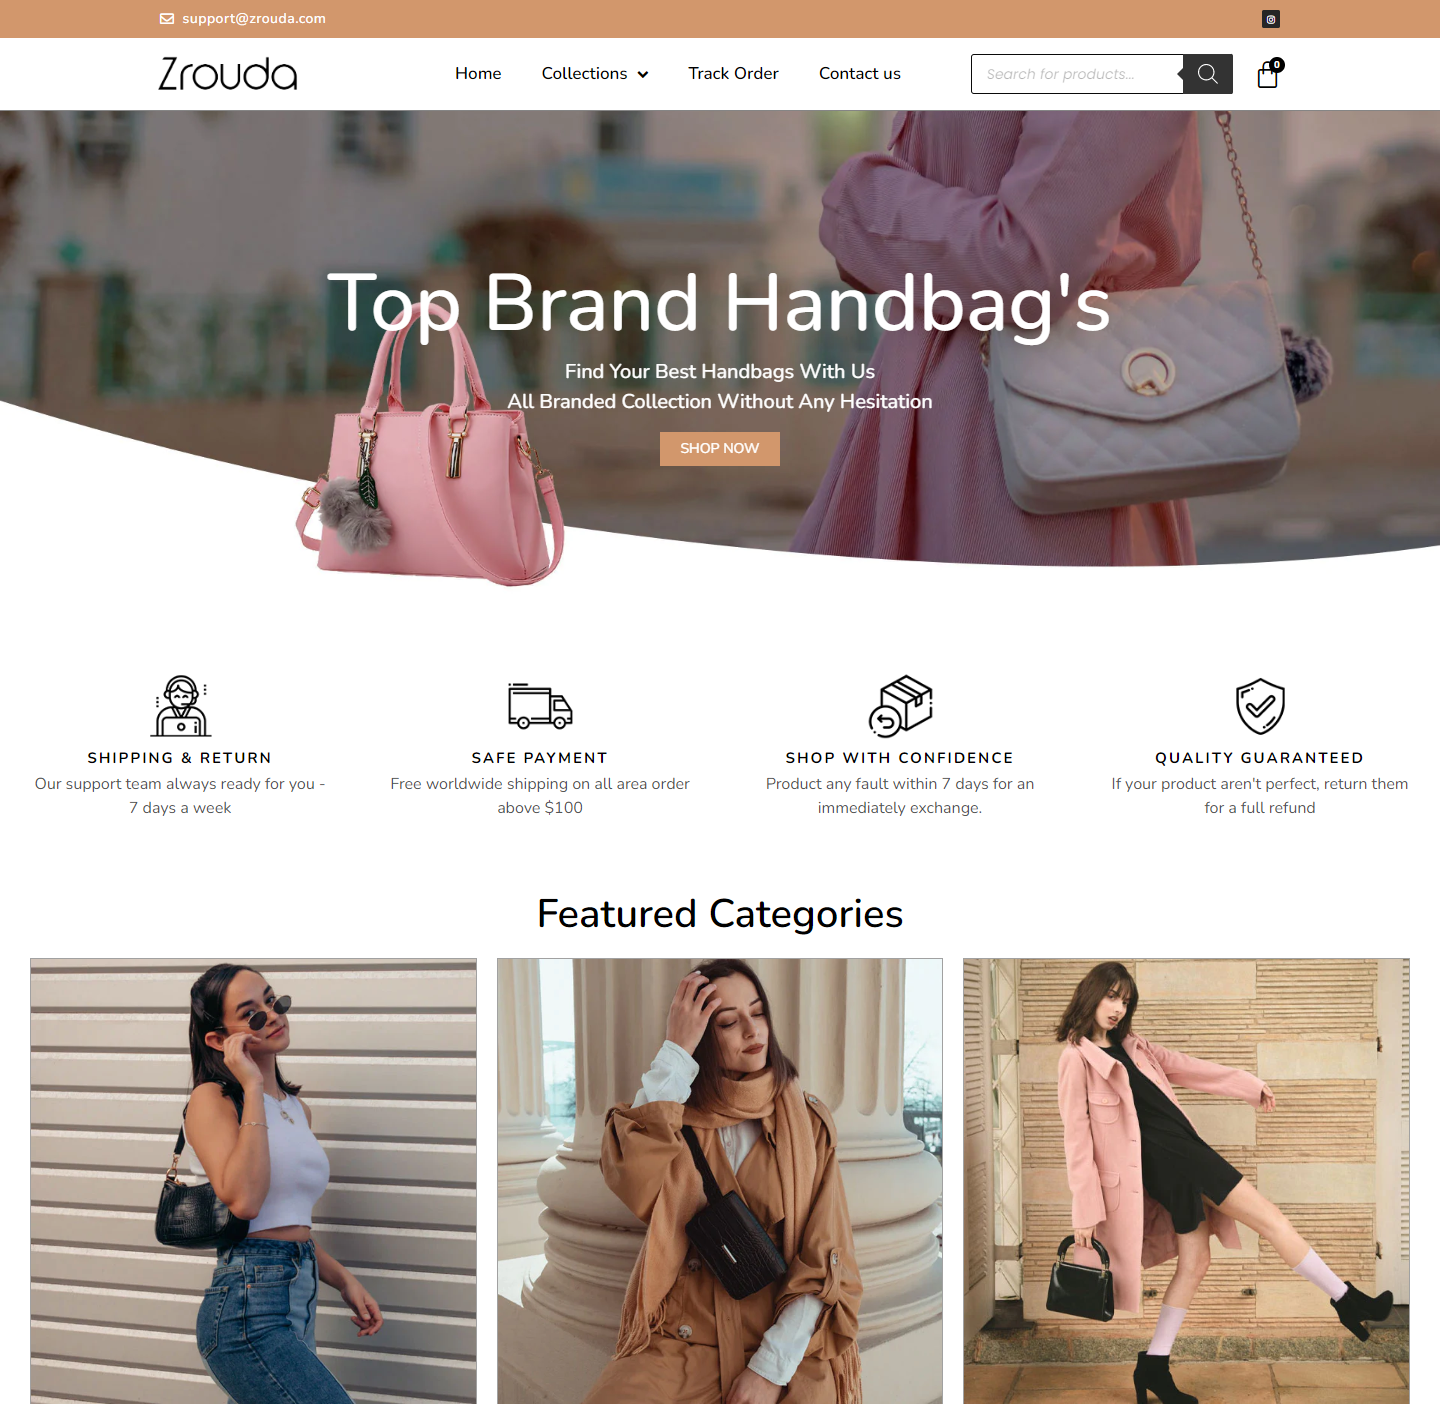 zrouda is one of our premium example of web design services for our customer